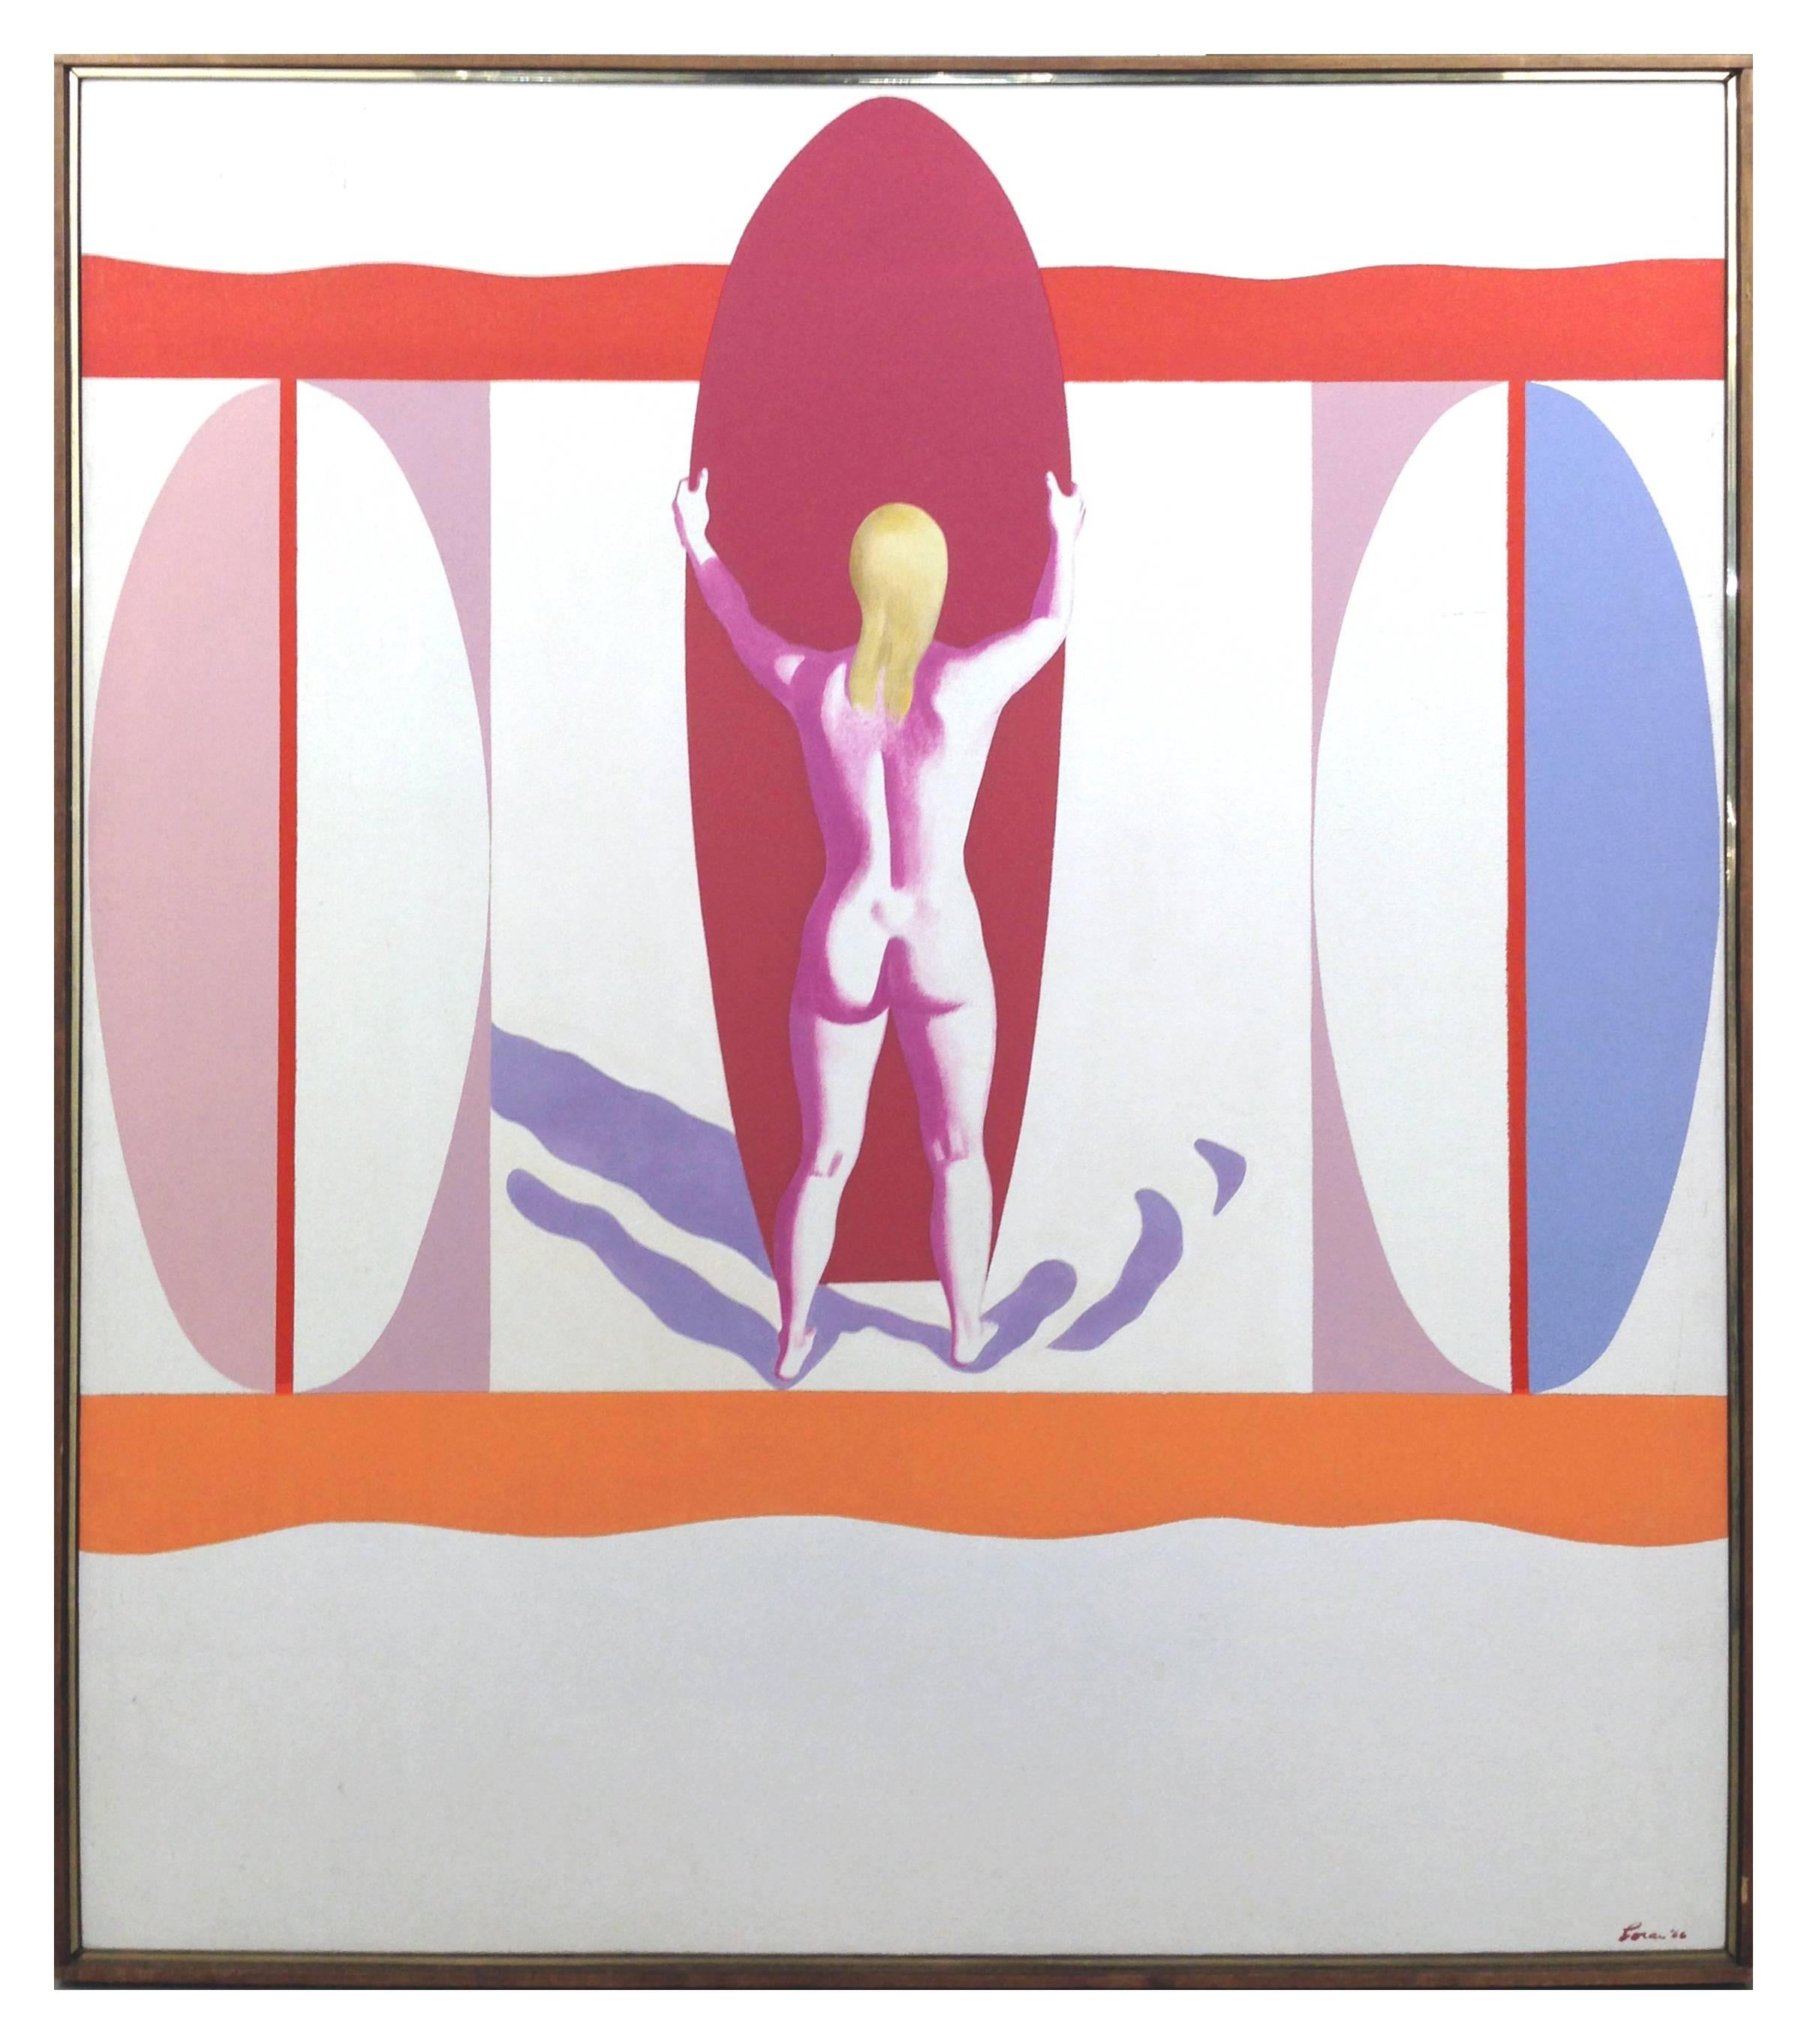 Erle Loran Figurative Painting - "Young Surfer", Mid Century Pop Art Figurative Abstract in Pink, Orange, Purple